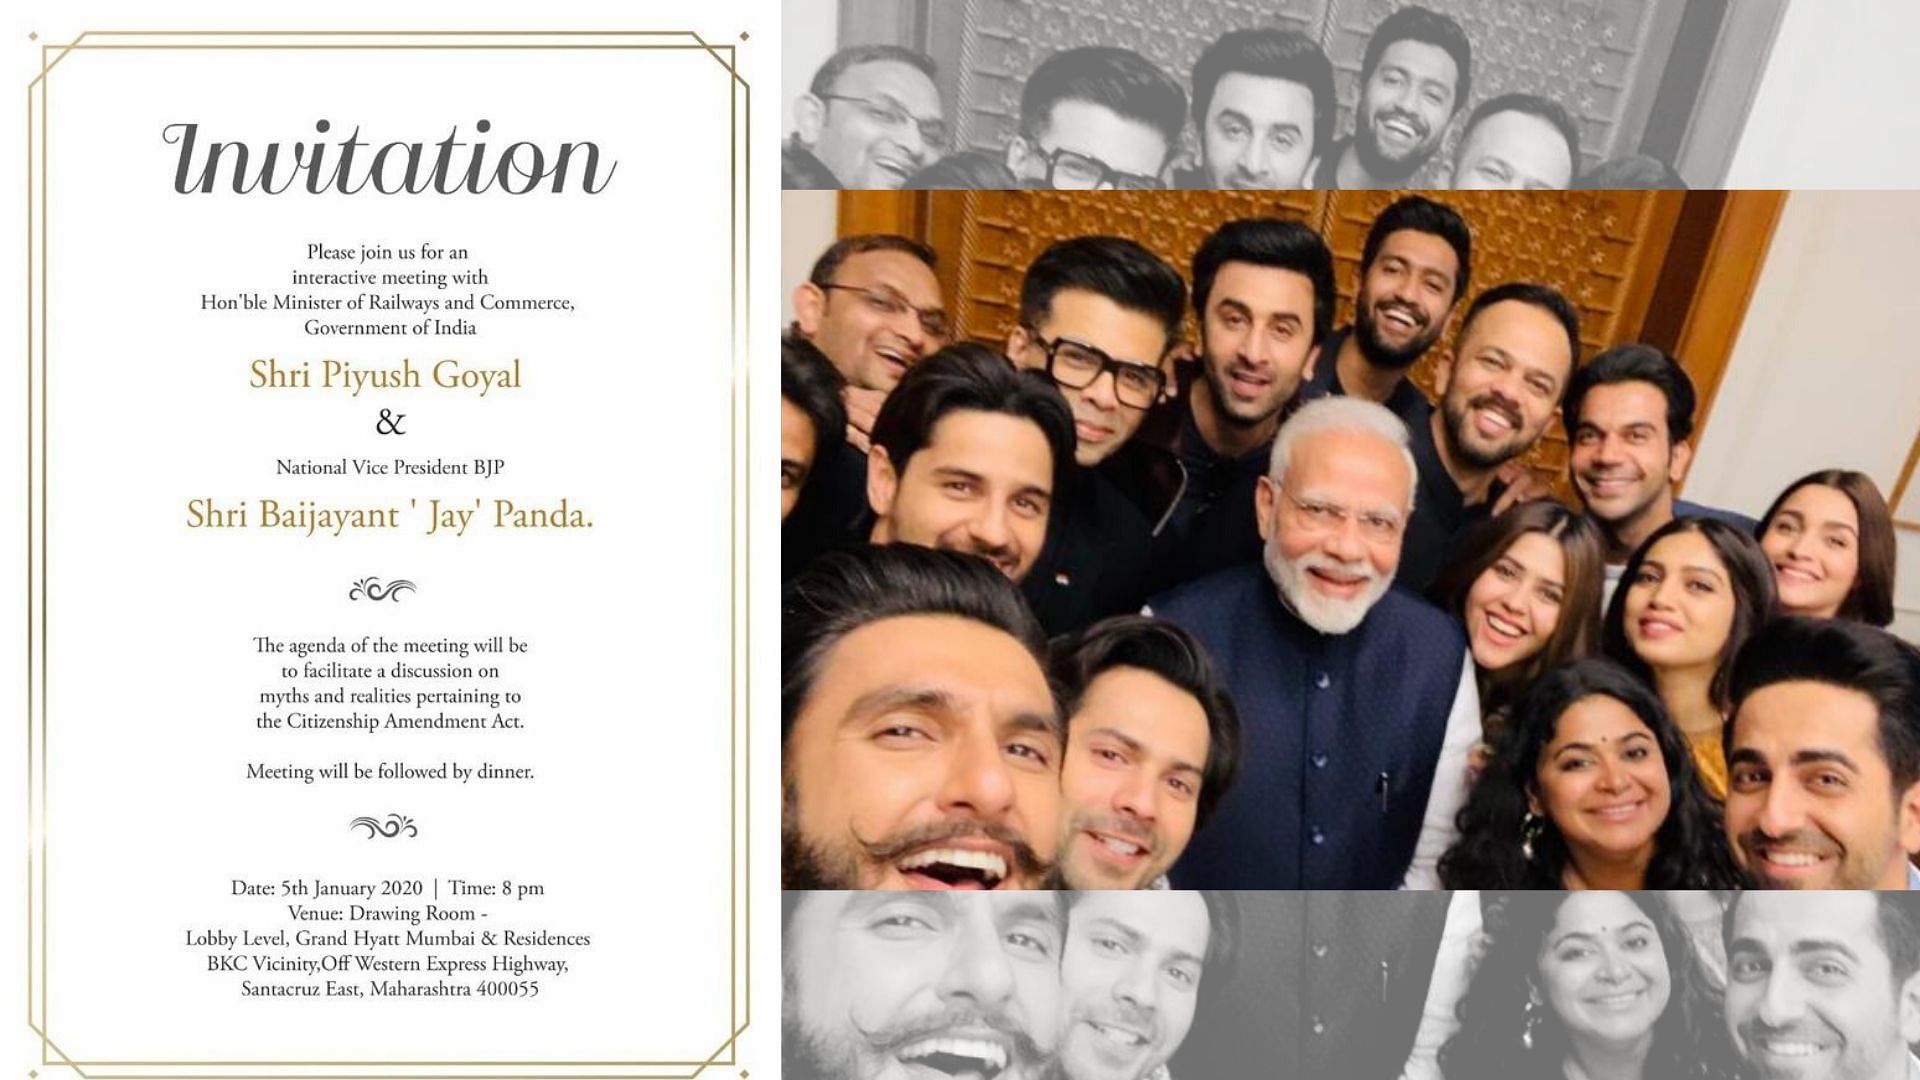 The invite for a discussion on CAA and PM Narendra Modi’s famous selfie with some of Bollywood’s key players.